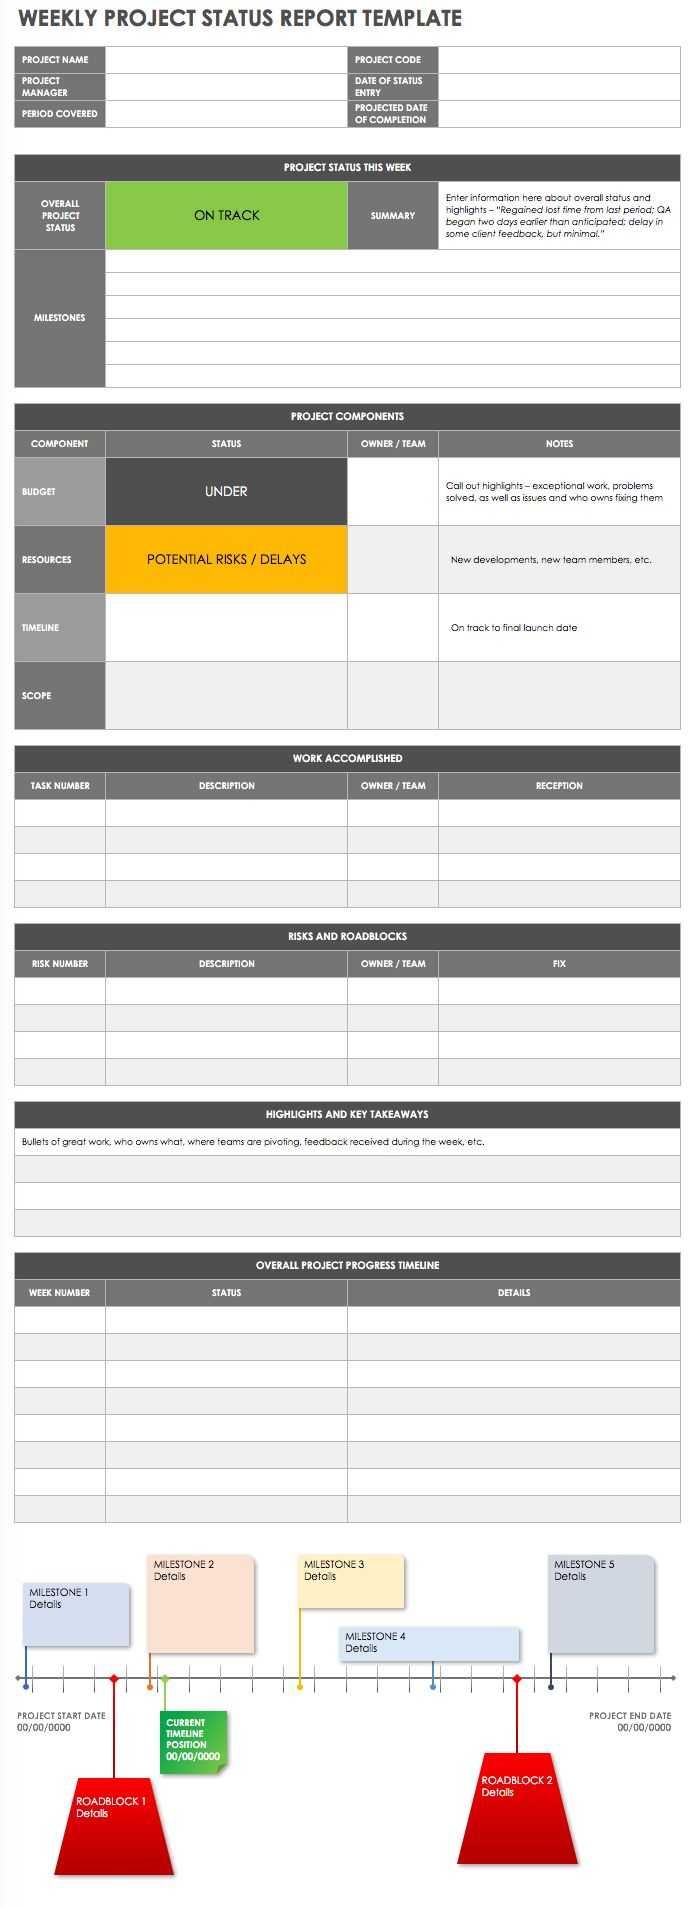 Weekly Project Status Report Sample - Falep.midnightpig.co Within Weekly Project Status Report Template Powerpoint